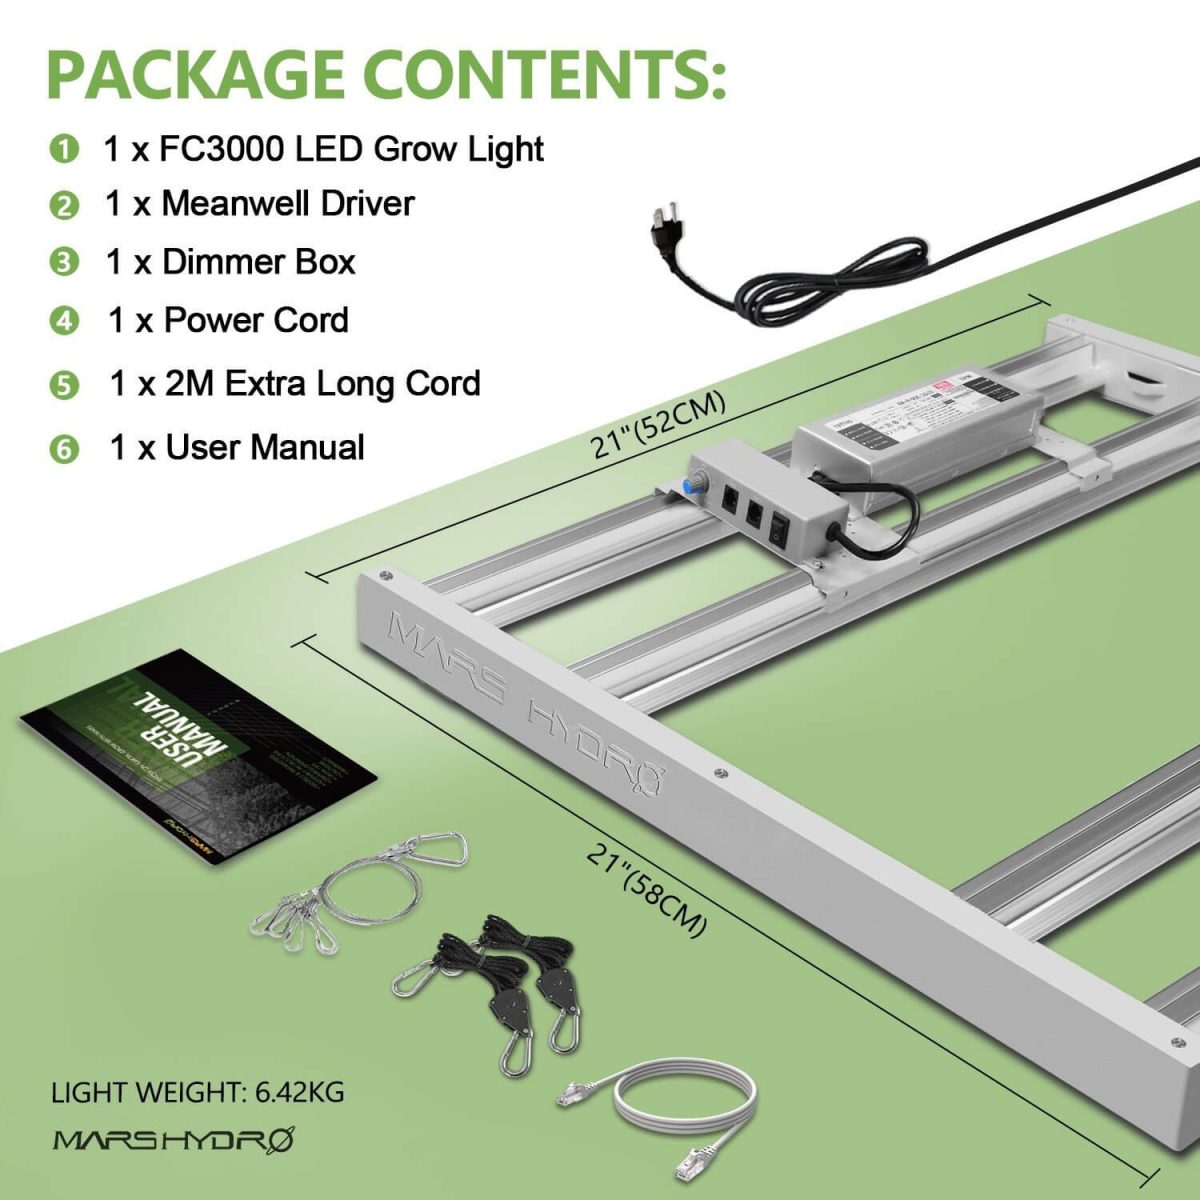 Inside the Mars Hydro FC3000 package, customers will get: 1xFC3000 led grow light, 1xlight driver, 1xdimmer box, 1xpower cord, 1xdimming cord, 1xtwo-meter long extension cord, 1xuser manual. The FC3000 dimensions are 580*520*81.5MM, and weighs 4.37kg.